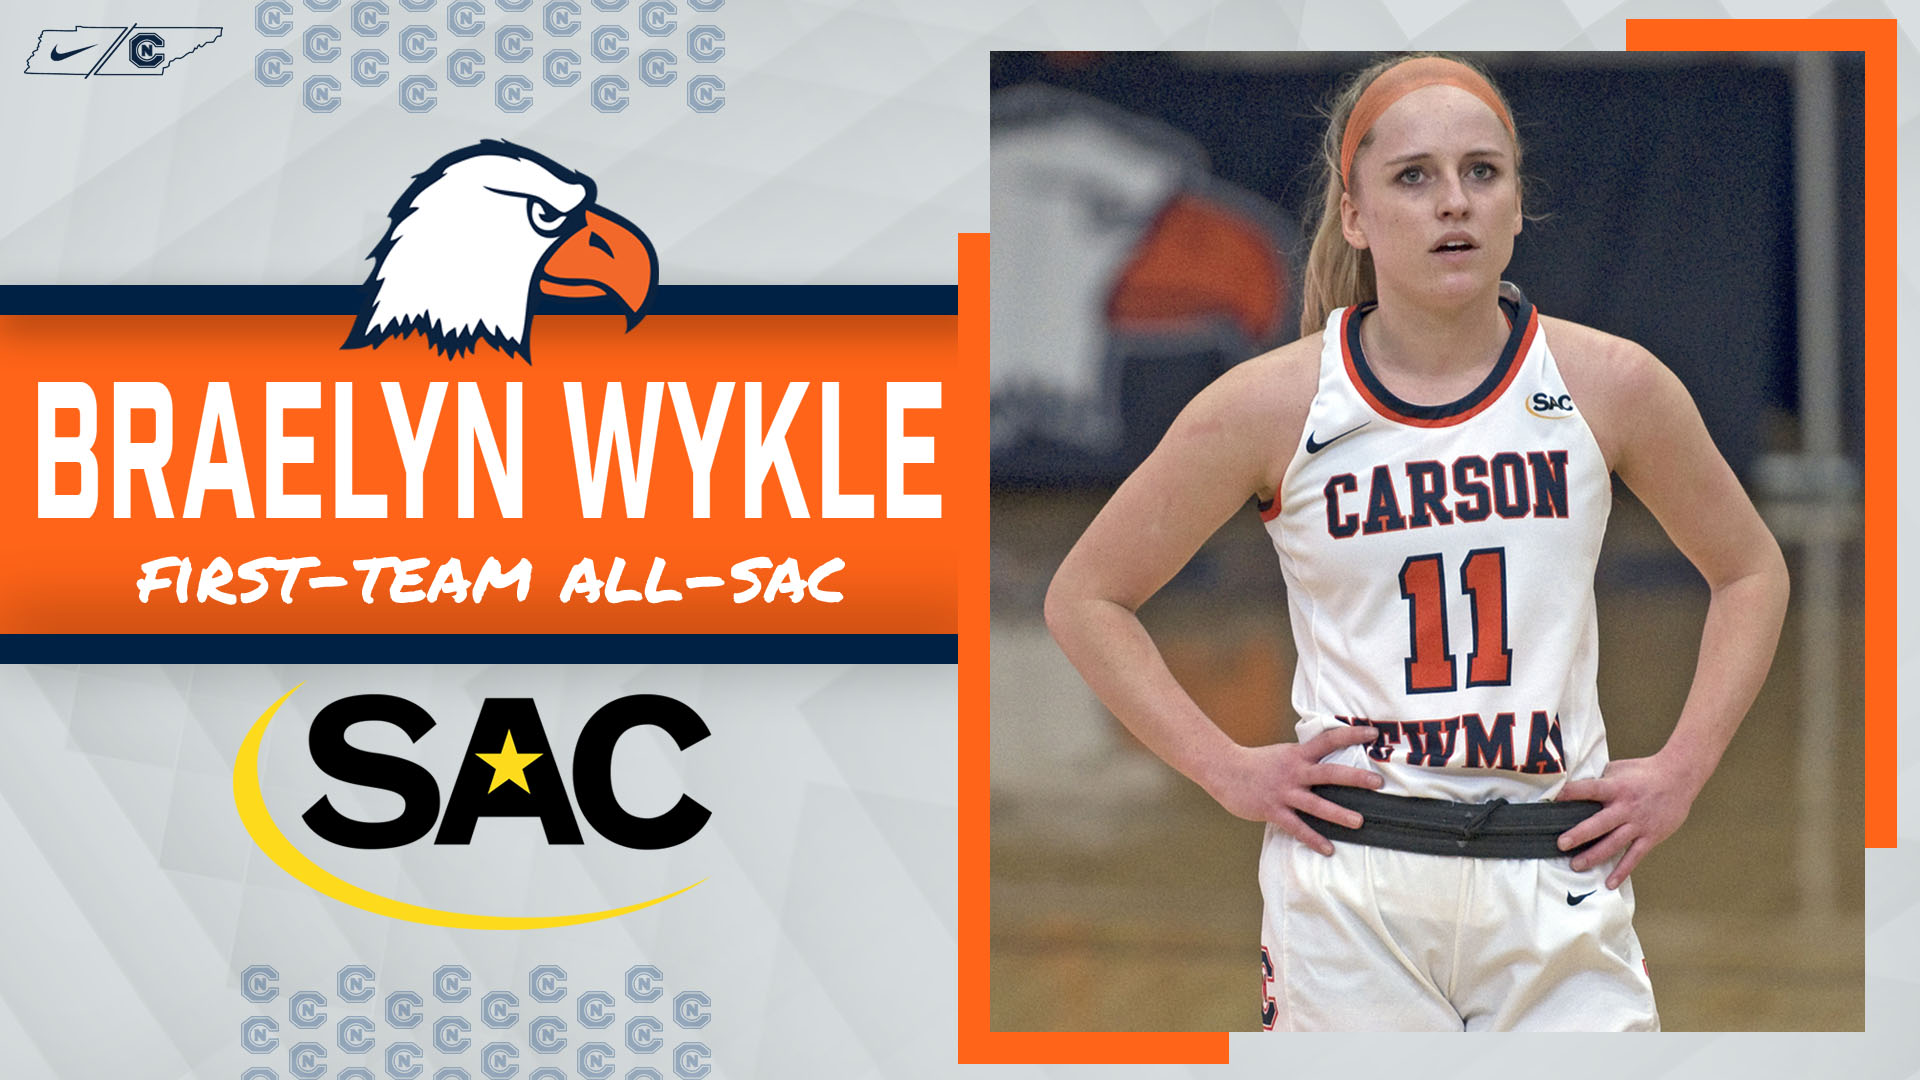 Wykle and Rutherford earn All-SAC honors